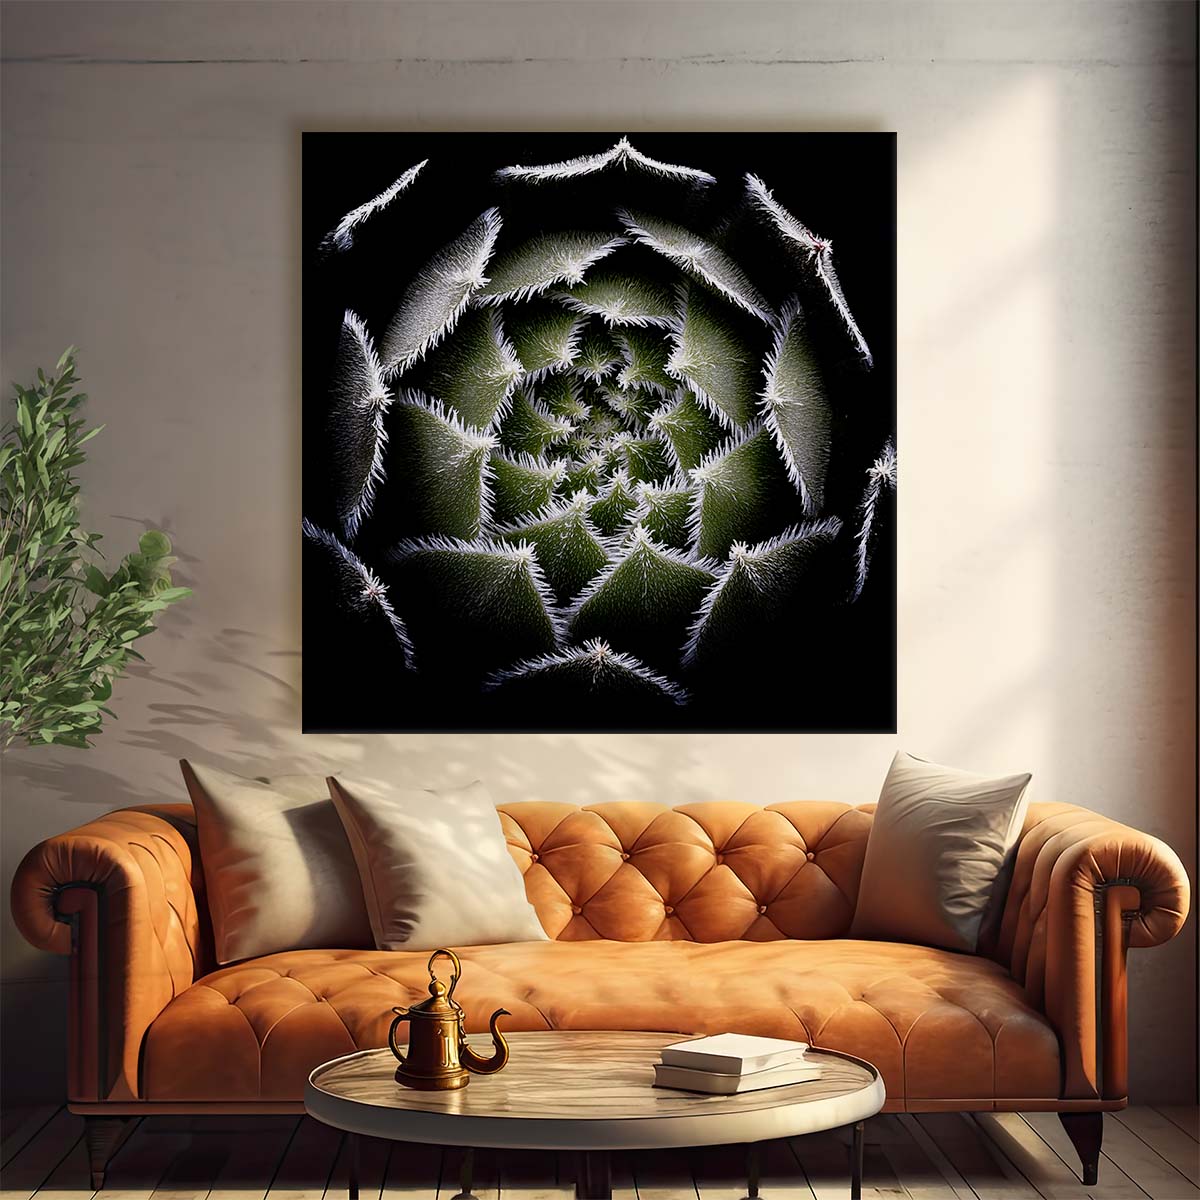 Geometric Floral Masterpiece Abstract Succulent Rosette Macro Wall Art by Luxuriance Designs. Made in USA.